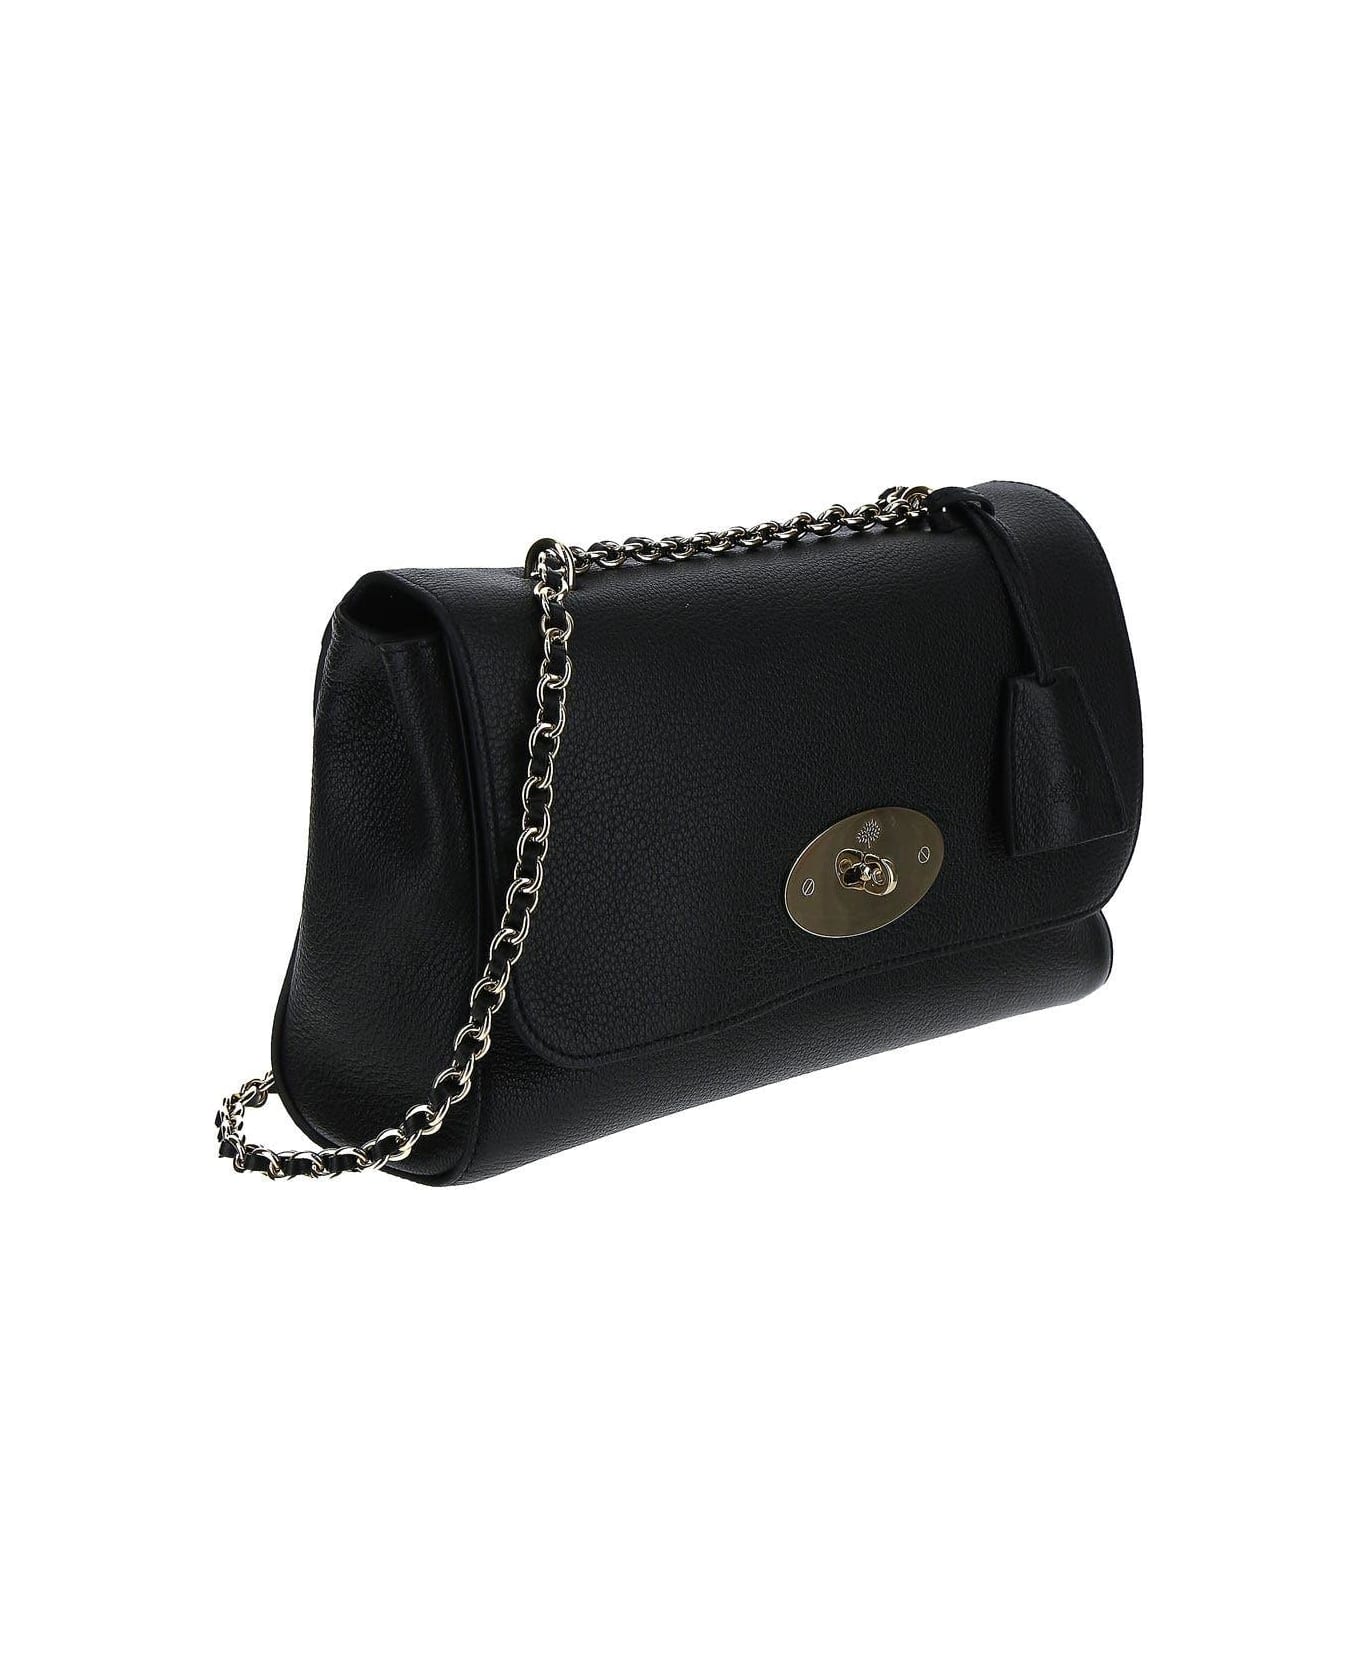 Mulberry Medium Top Handle Lily